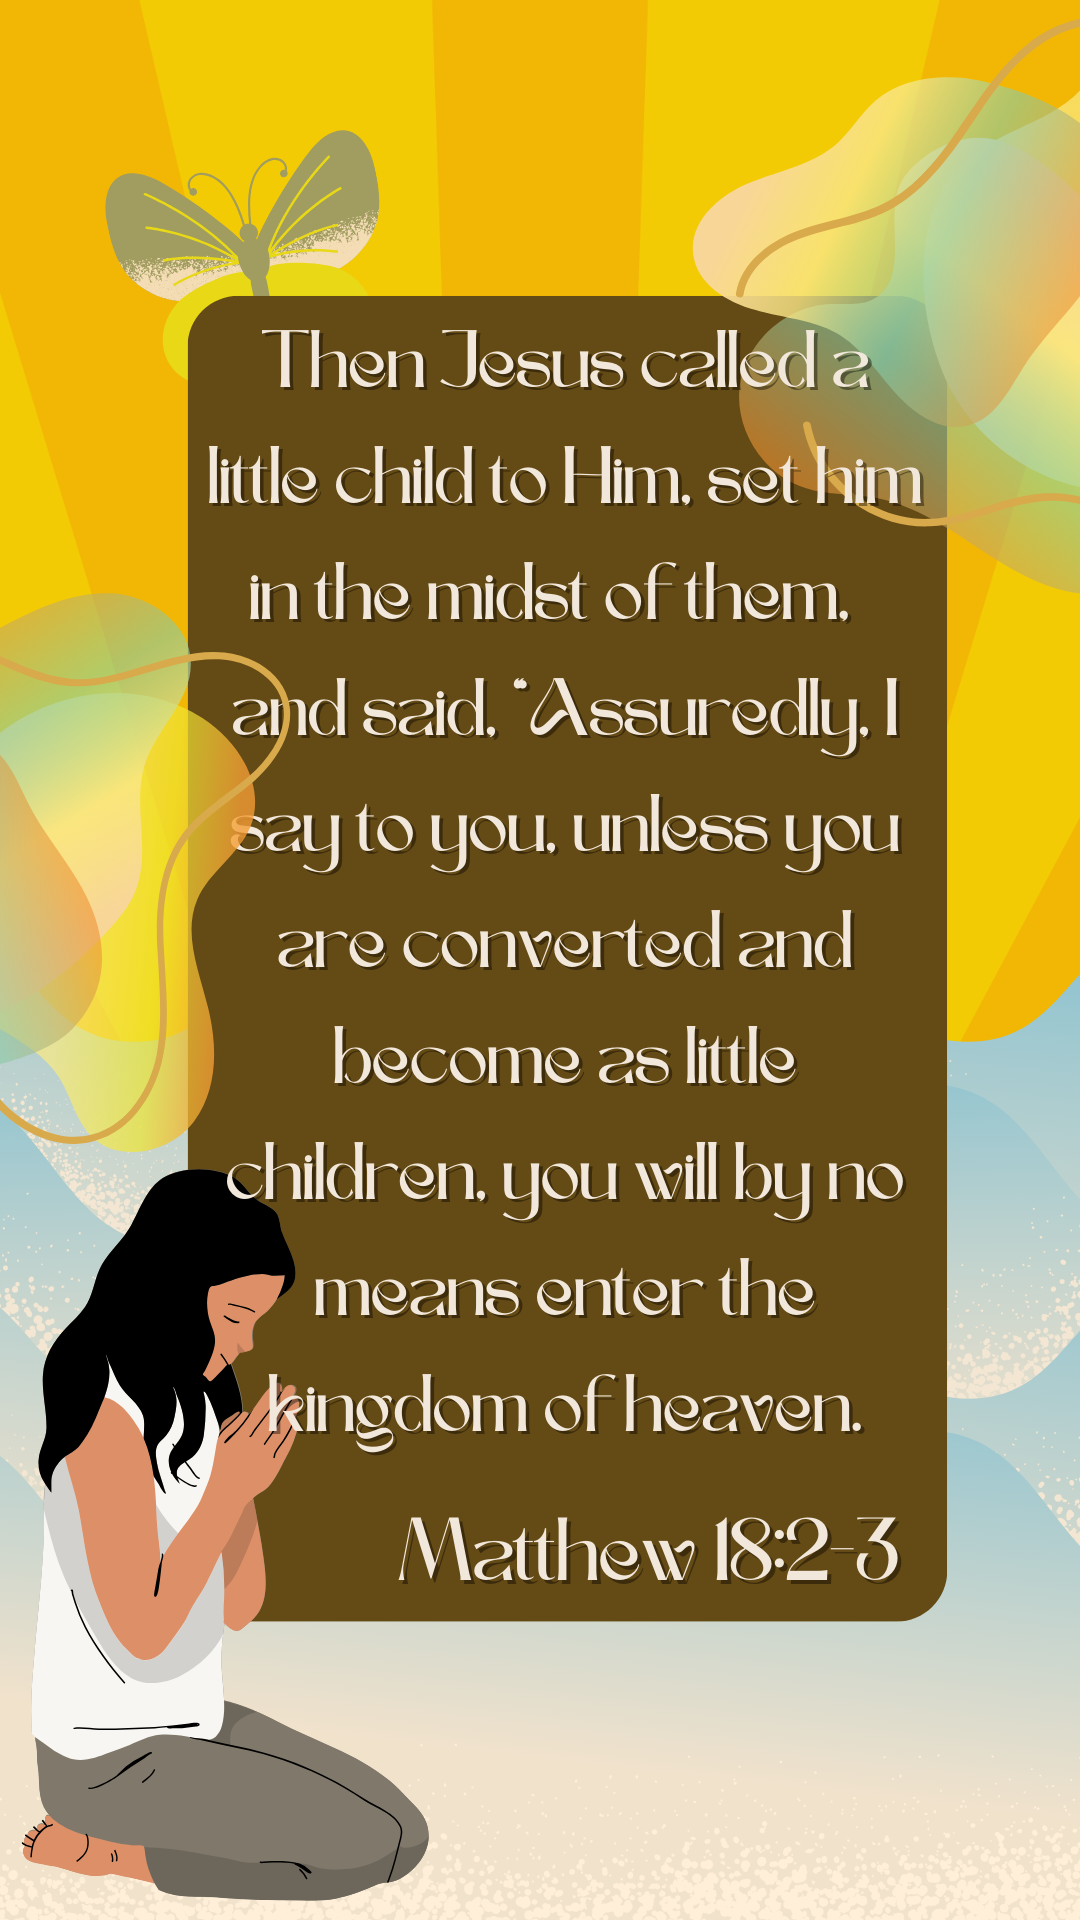 Matthew 18:2-3  Then Jesus called a little child to Him, set him in the midst of them, 3 and said, “Assuredly, I say to you, unless you are converted and become as little children, you will by no means enter the kingdom of heaven. Picture shows a girl kneeling and praying.